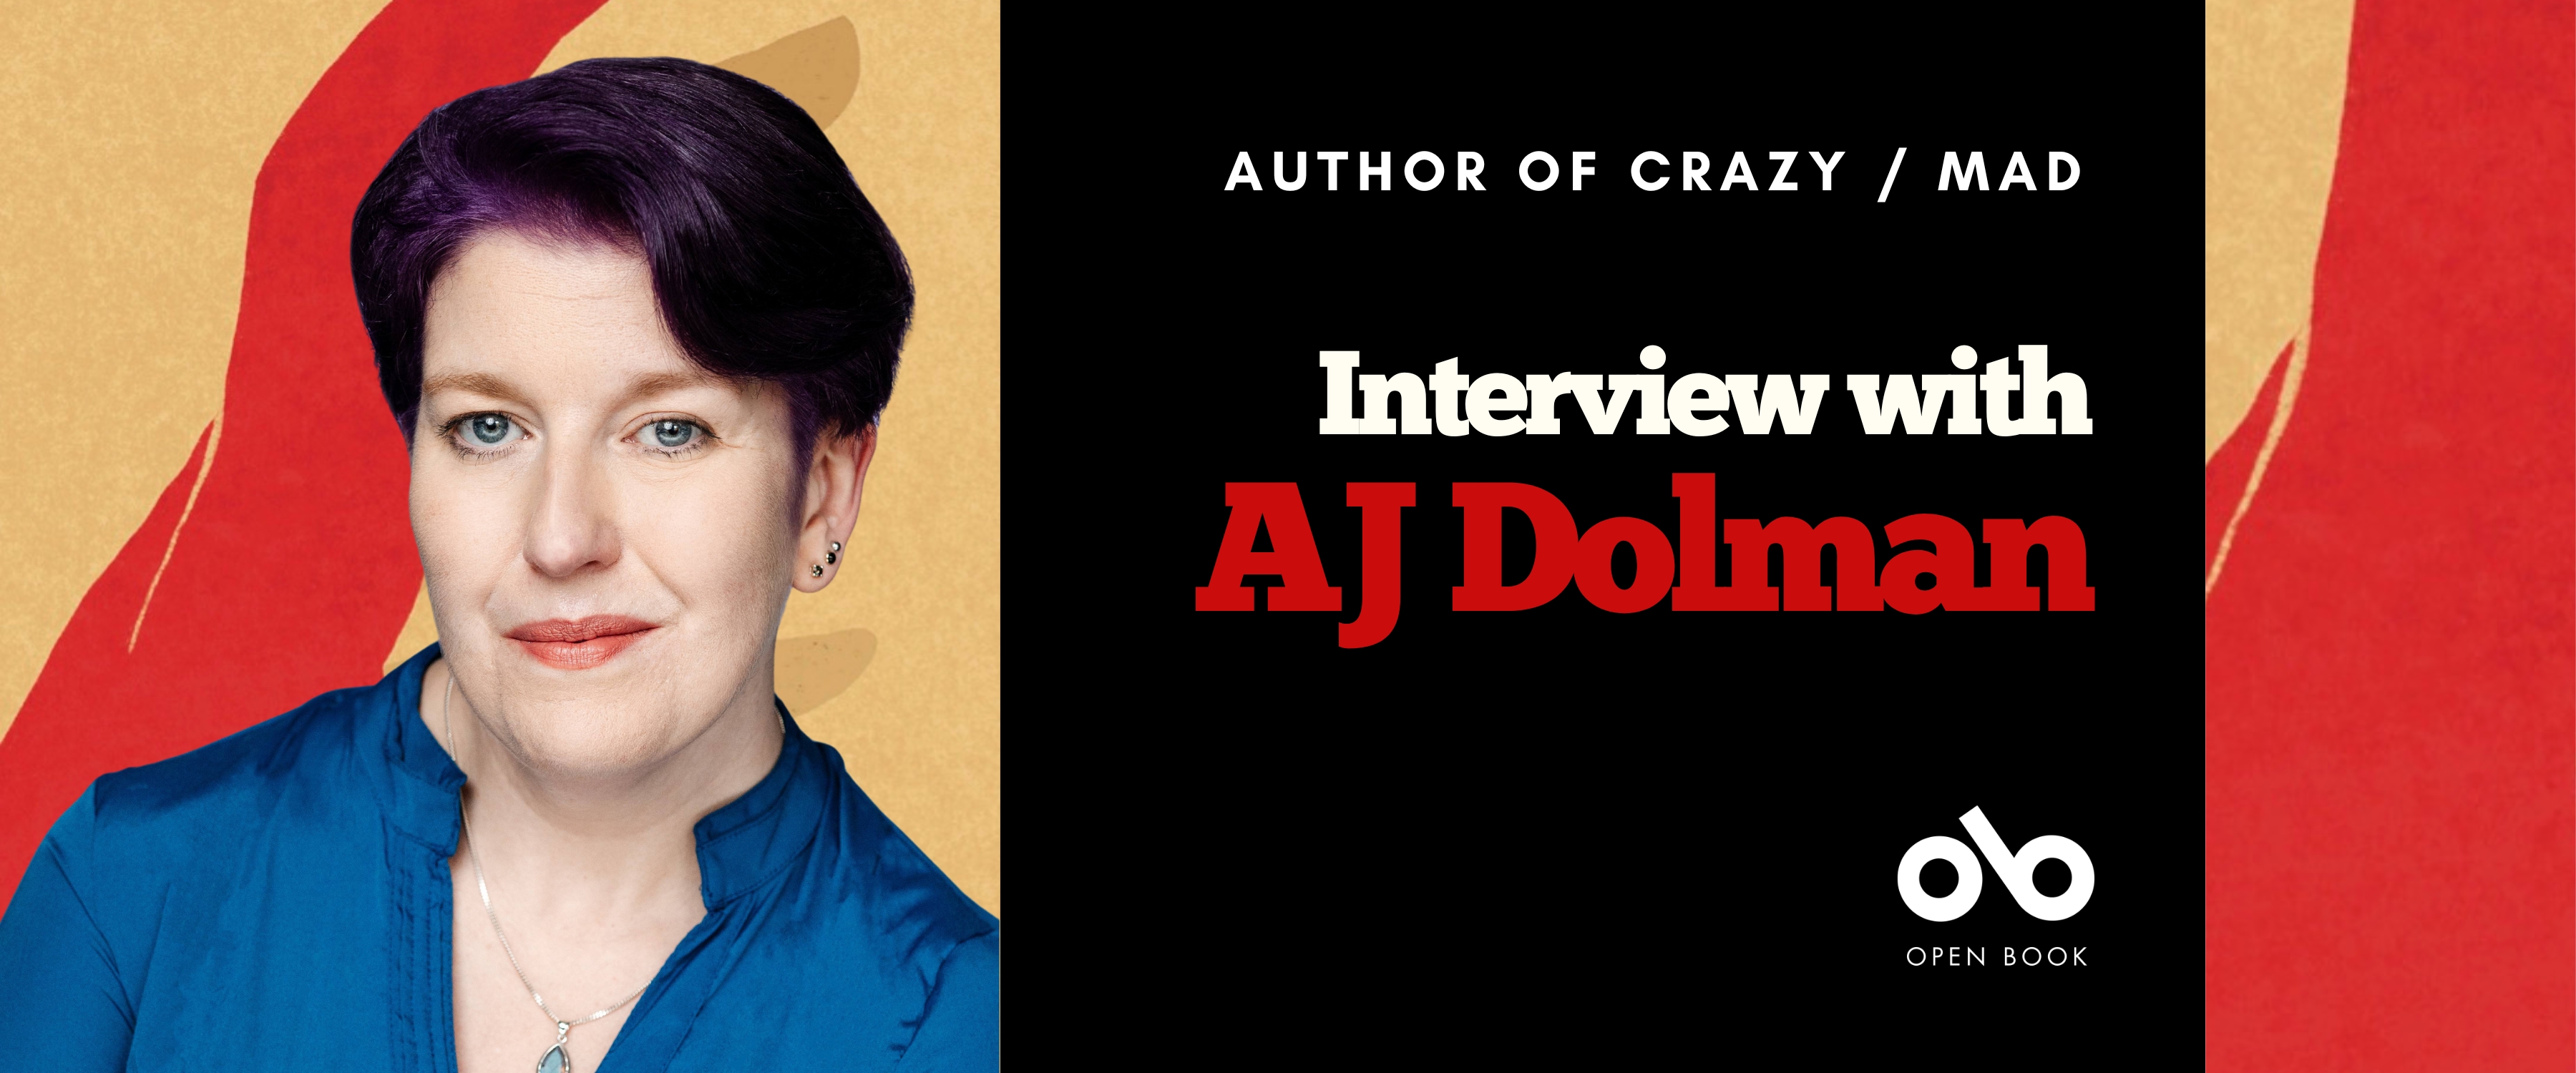 Interview with AJ Dolman banner. Image of author photo the left, person with purple shirt and short, dark hair, arms crossed and looking outward. To centre right a dark section with text overlaid and Open Book logo. Background is red and yellow pattern from book cover.